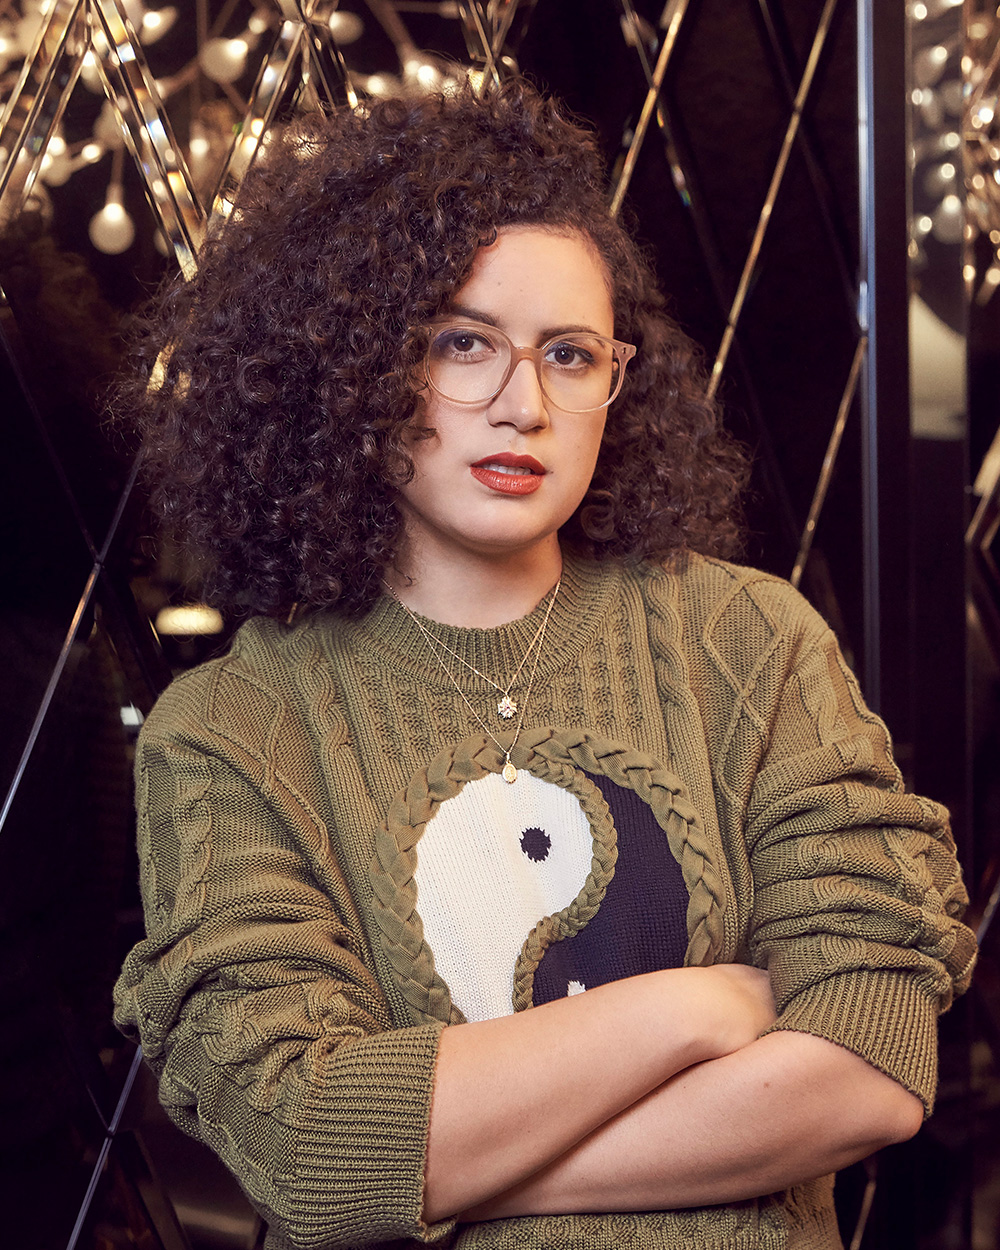 8 New-Gen New Zealand Women on the Global Stage _ rose-matafeo On being thankful: “There have been many before me who worked hard to allow me, a self-reflective, sensitive Pisces, to unleash my pretty mild comedy on the world." - Comedian, Rose Matafeo.